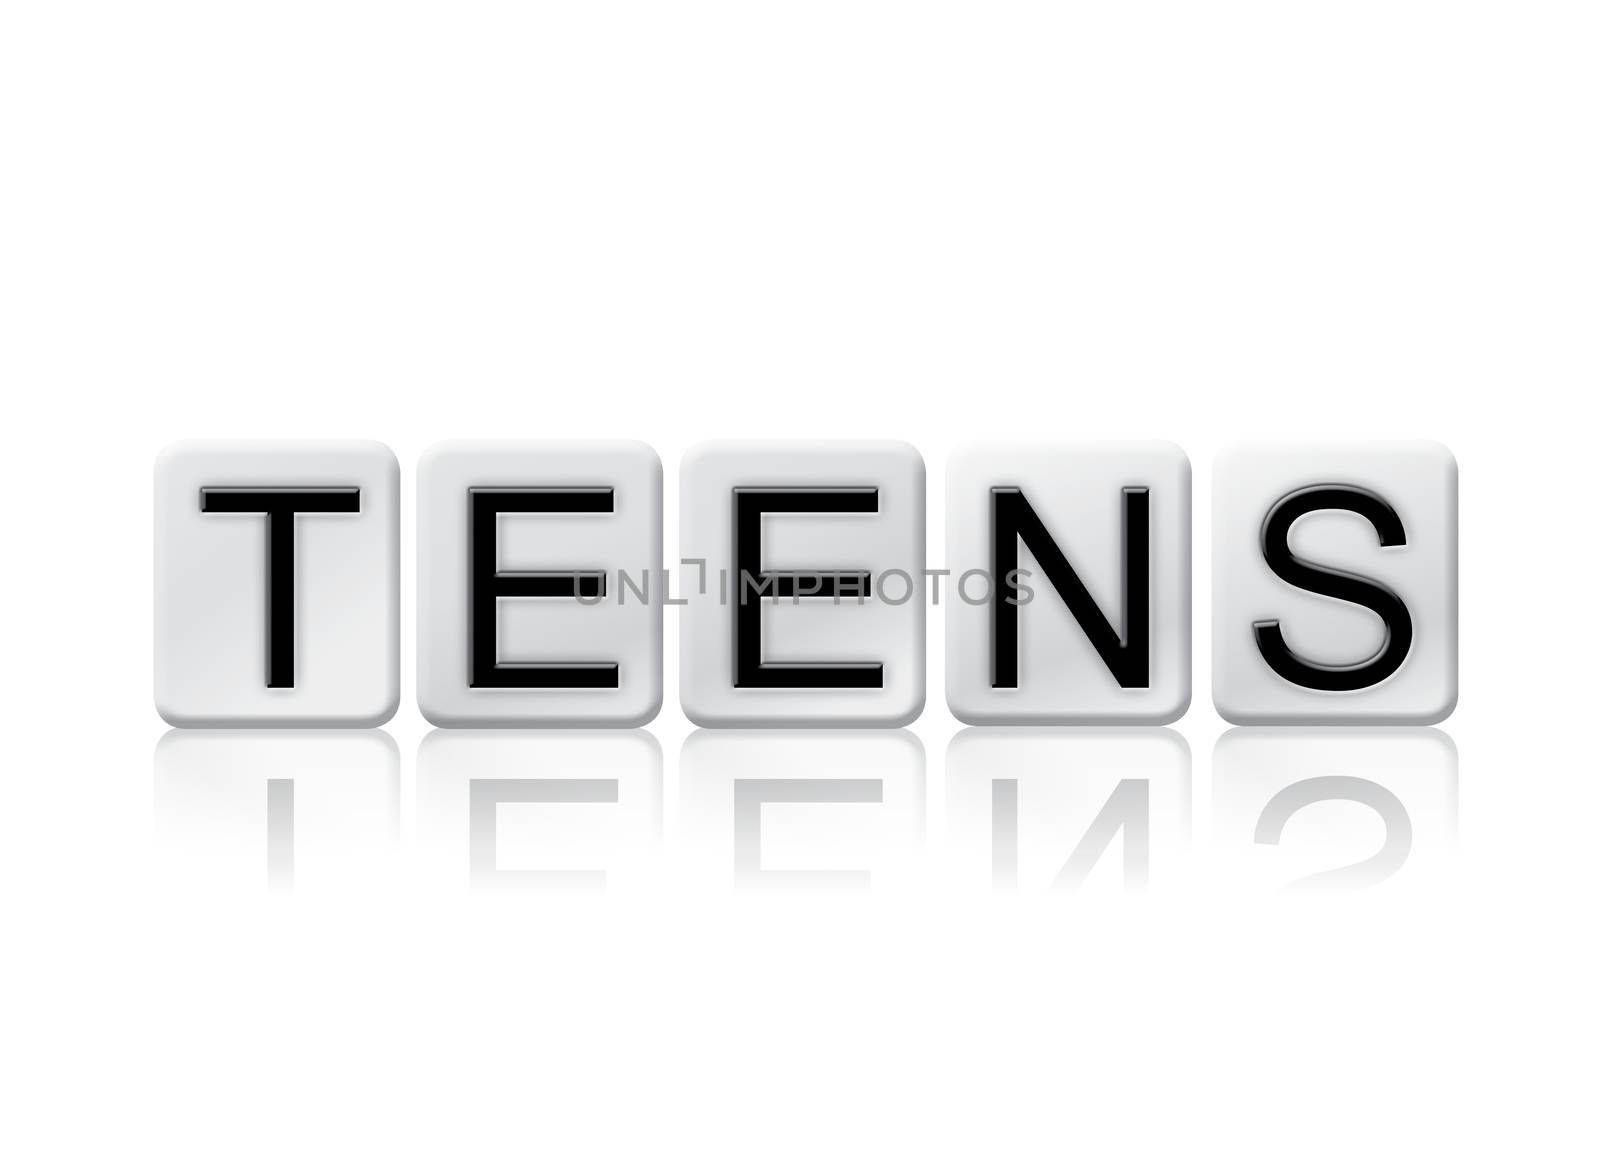 The word "Teens" written in tile letters isolated on a white background.